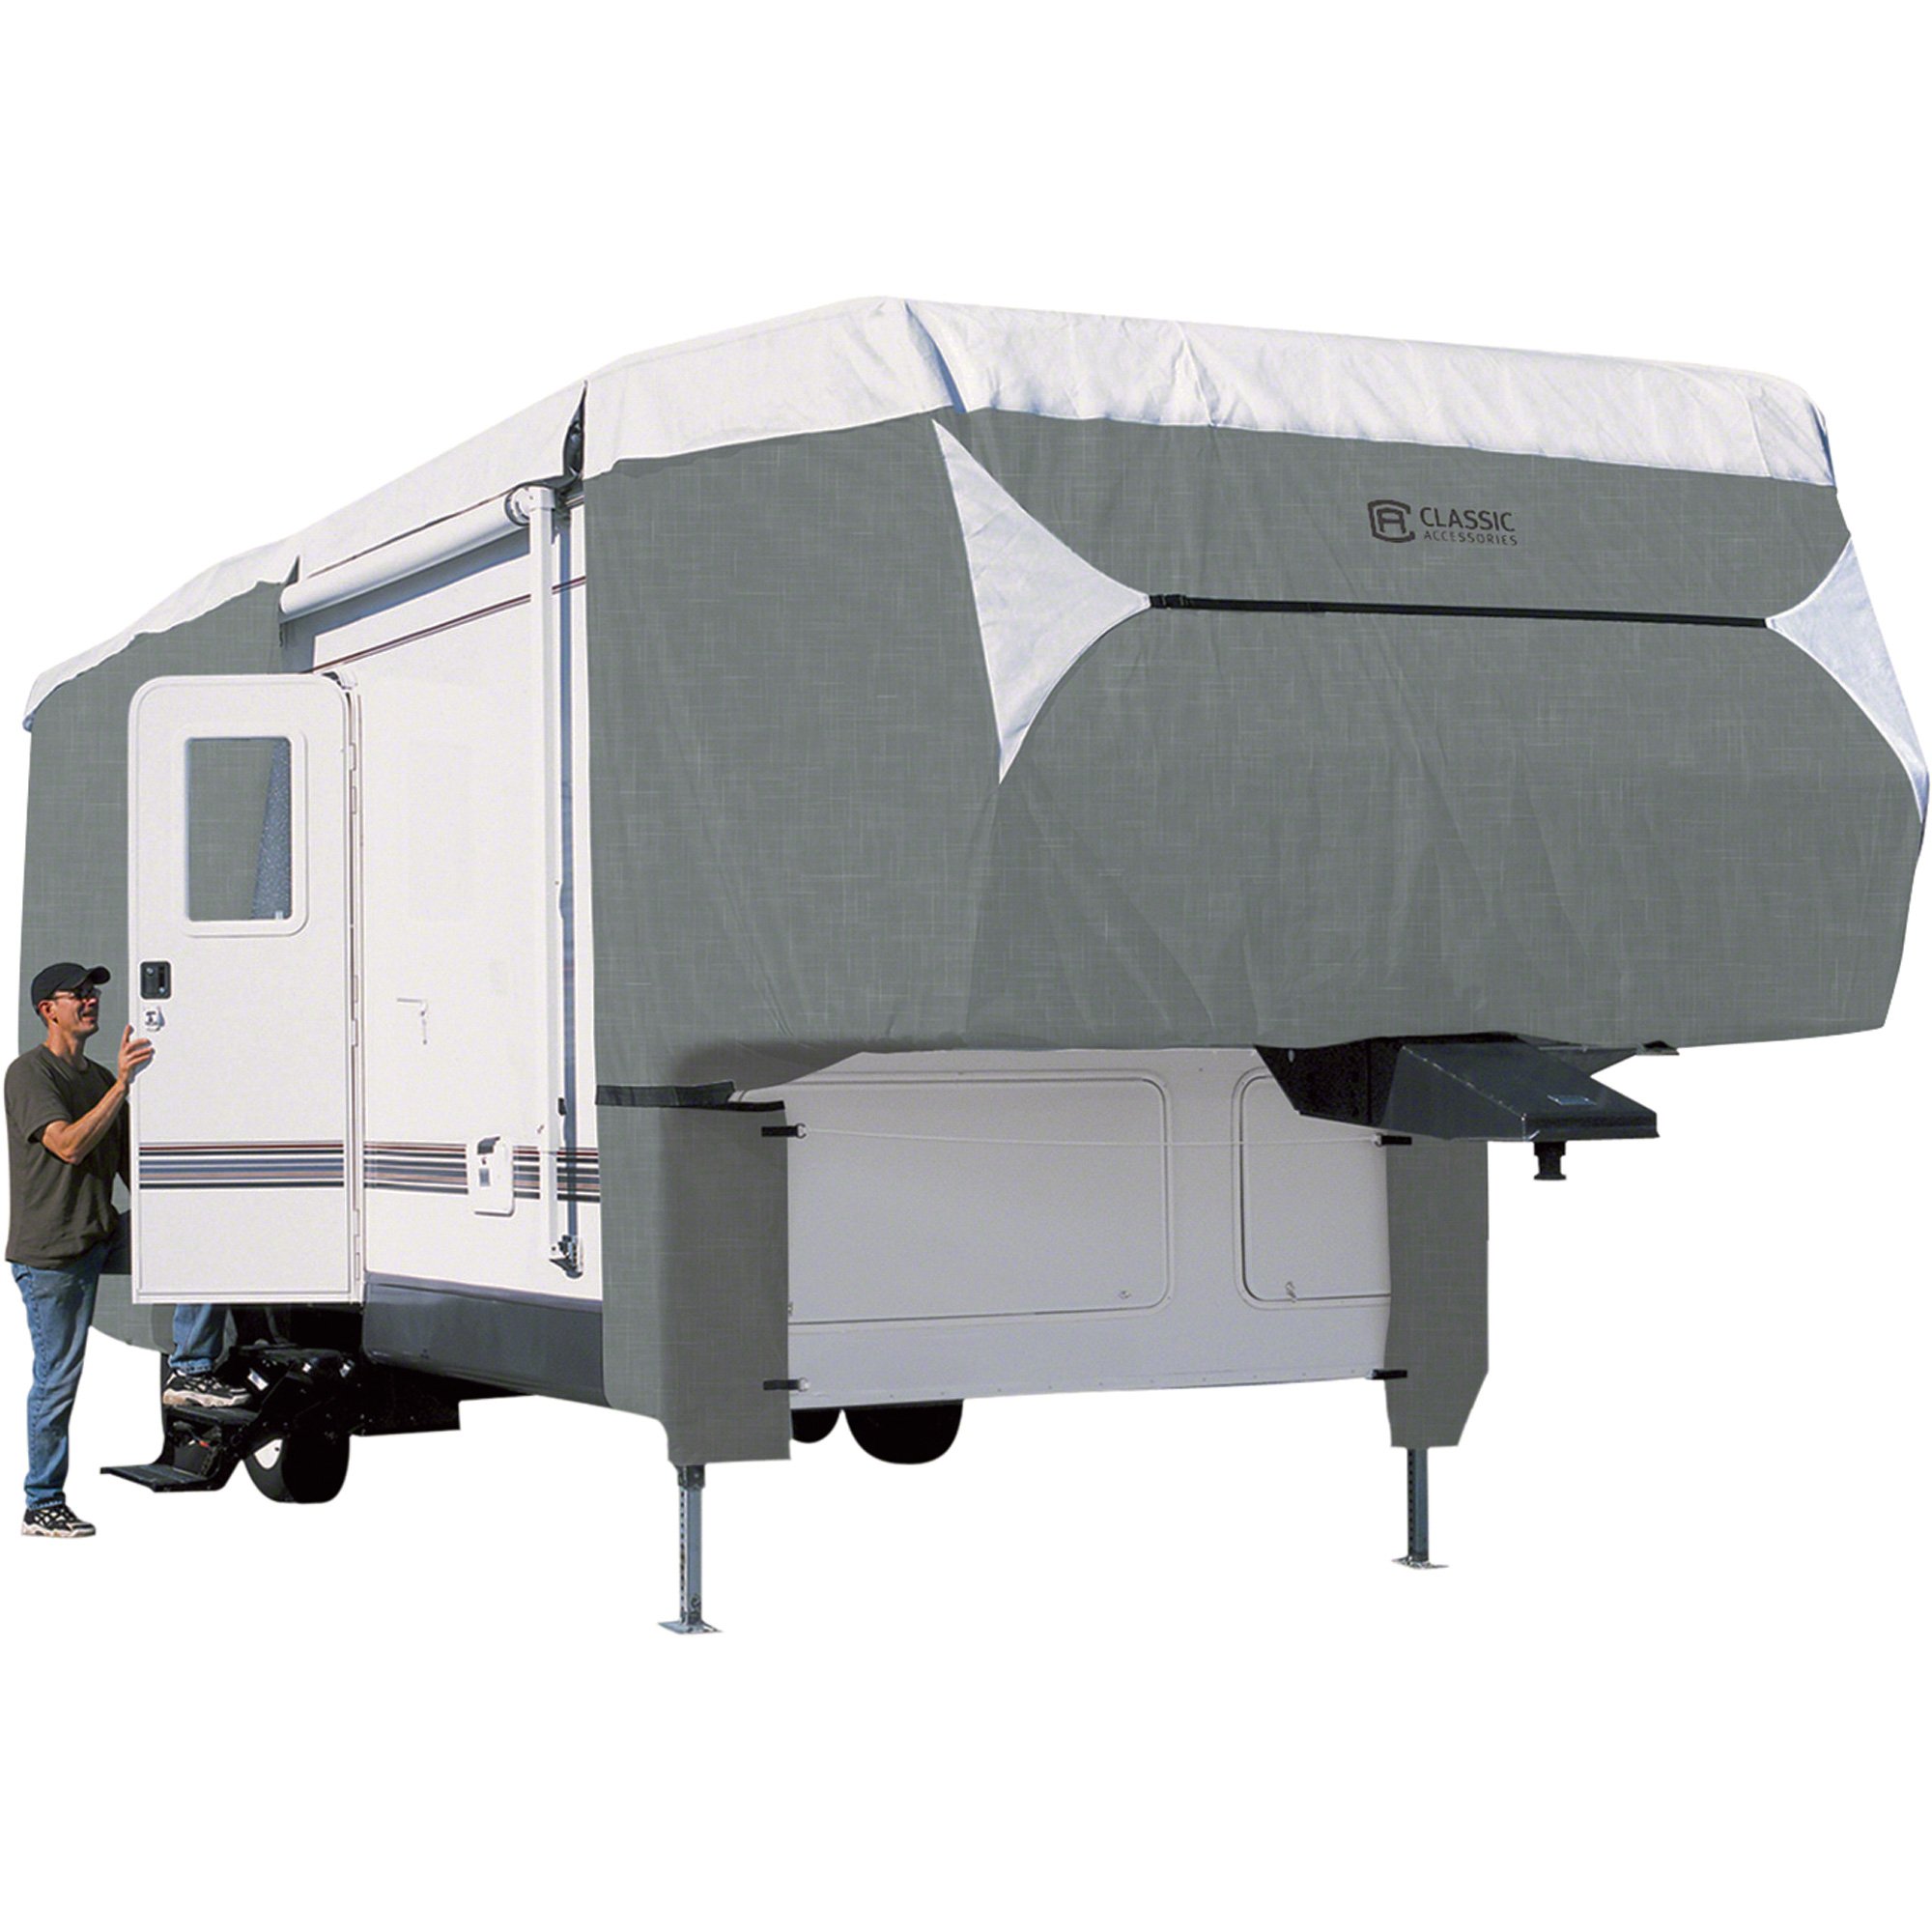 Classic Accessories OverDrive PolyPro Deluxe 5th Wheel Cover — Gray and  White, Fits x Model# 75663 Northern Tool